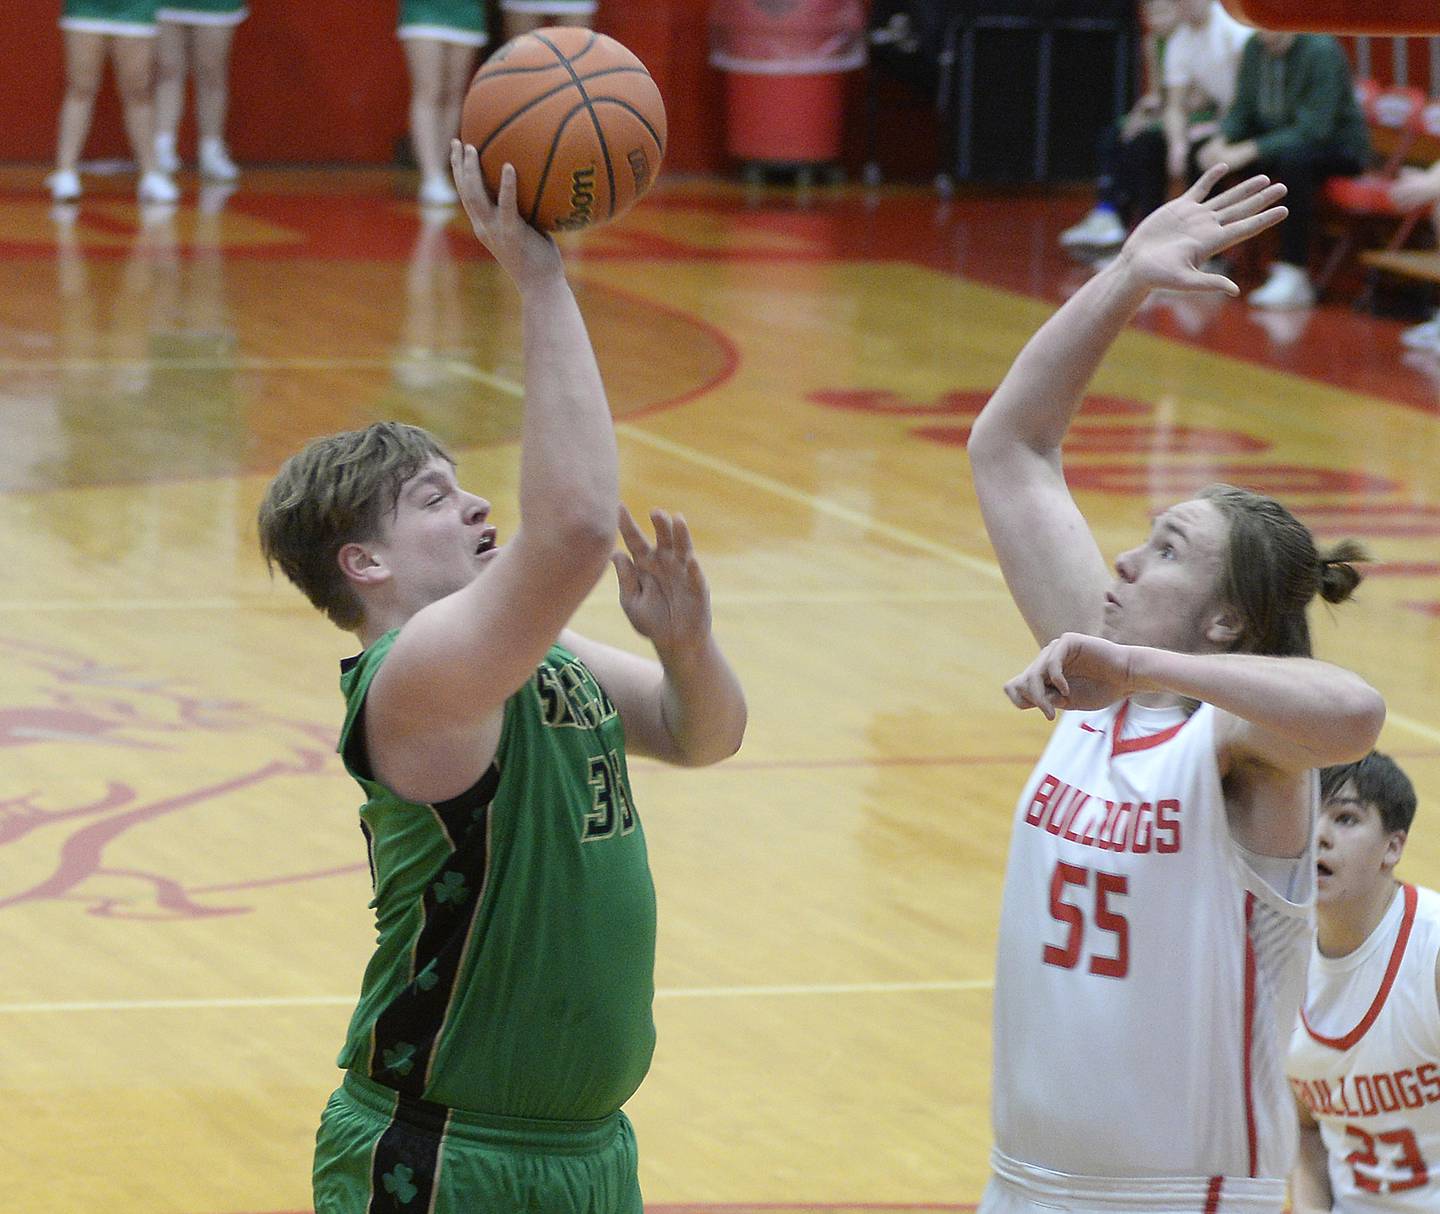 Seneca’s Josh Lucas shoots over the block attempt by Streator’s Quinn Baker in the 1st period in Pops Dale Gymnasium on Tuesday Feb. 7, 2023 at Streator High School.